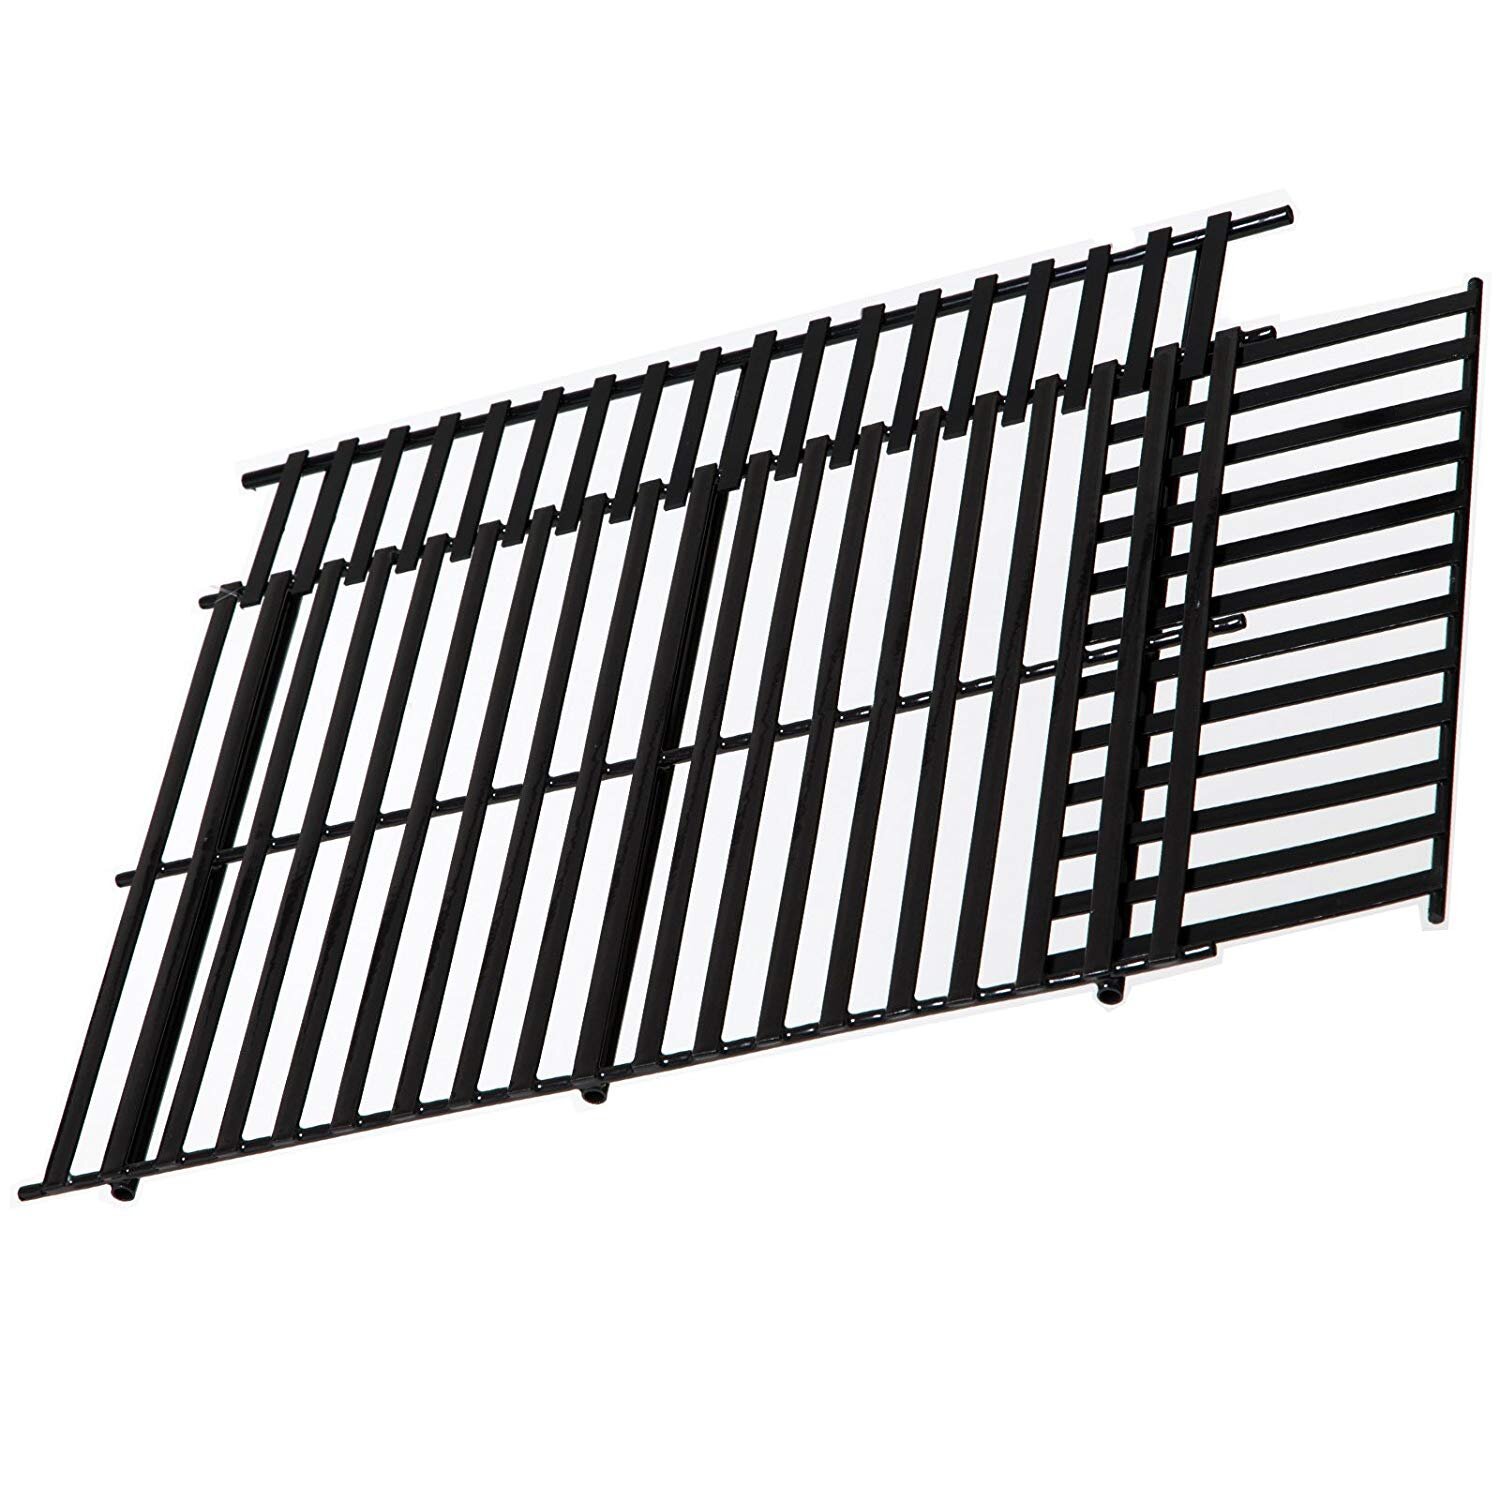 REDCAMP 30.3'' W x 12.2'' D Steel Grill Grate